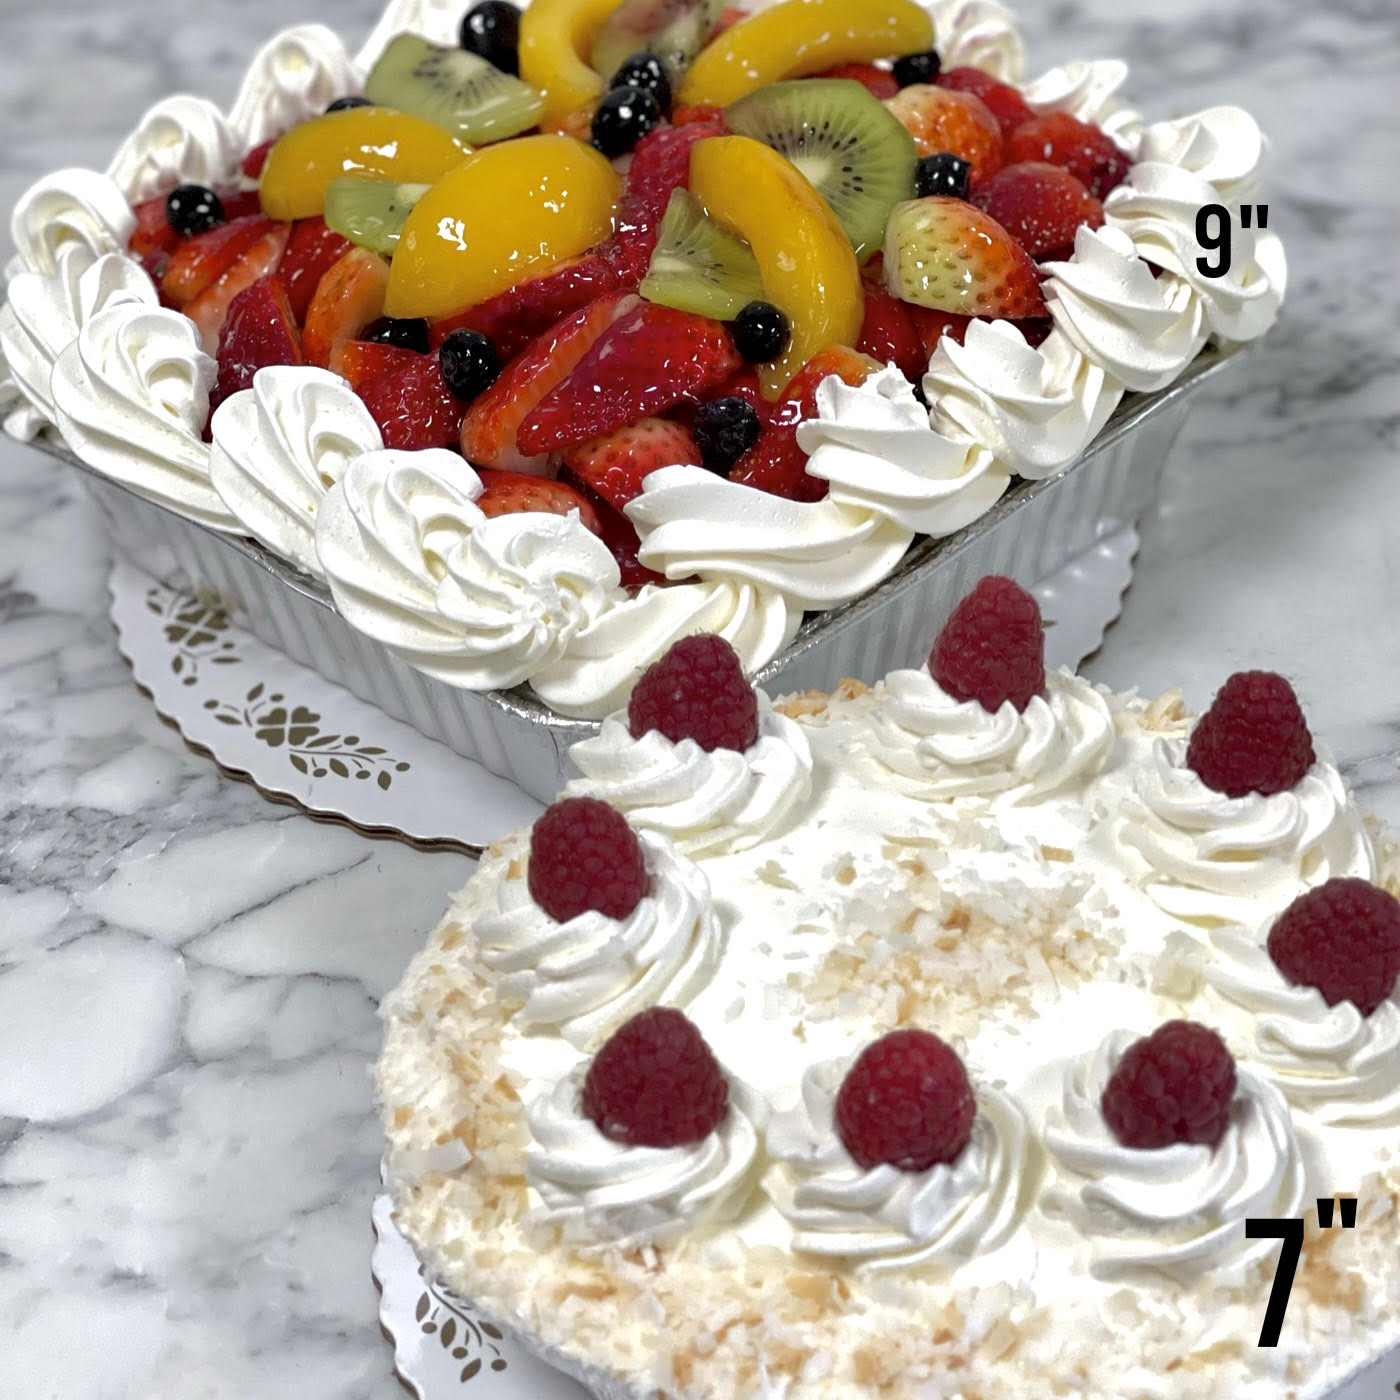 Authentic Tres Leches Cake - Cool & Custardy - That Skinny Chick Can Bake